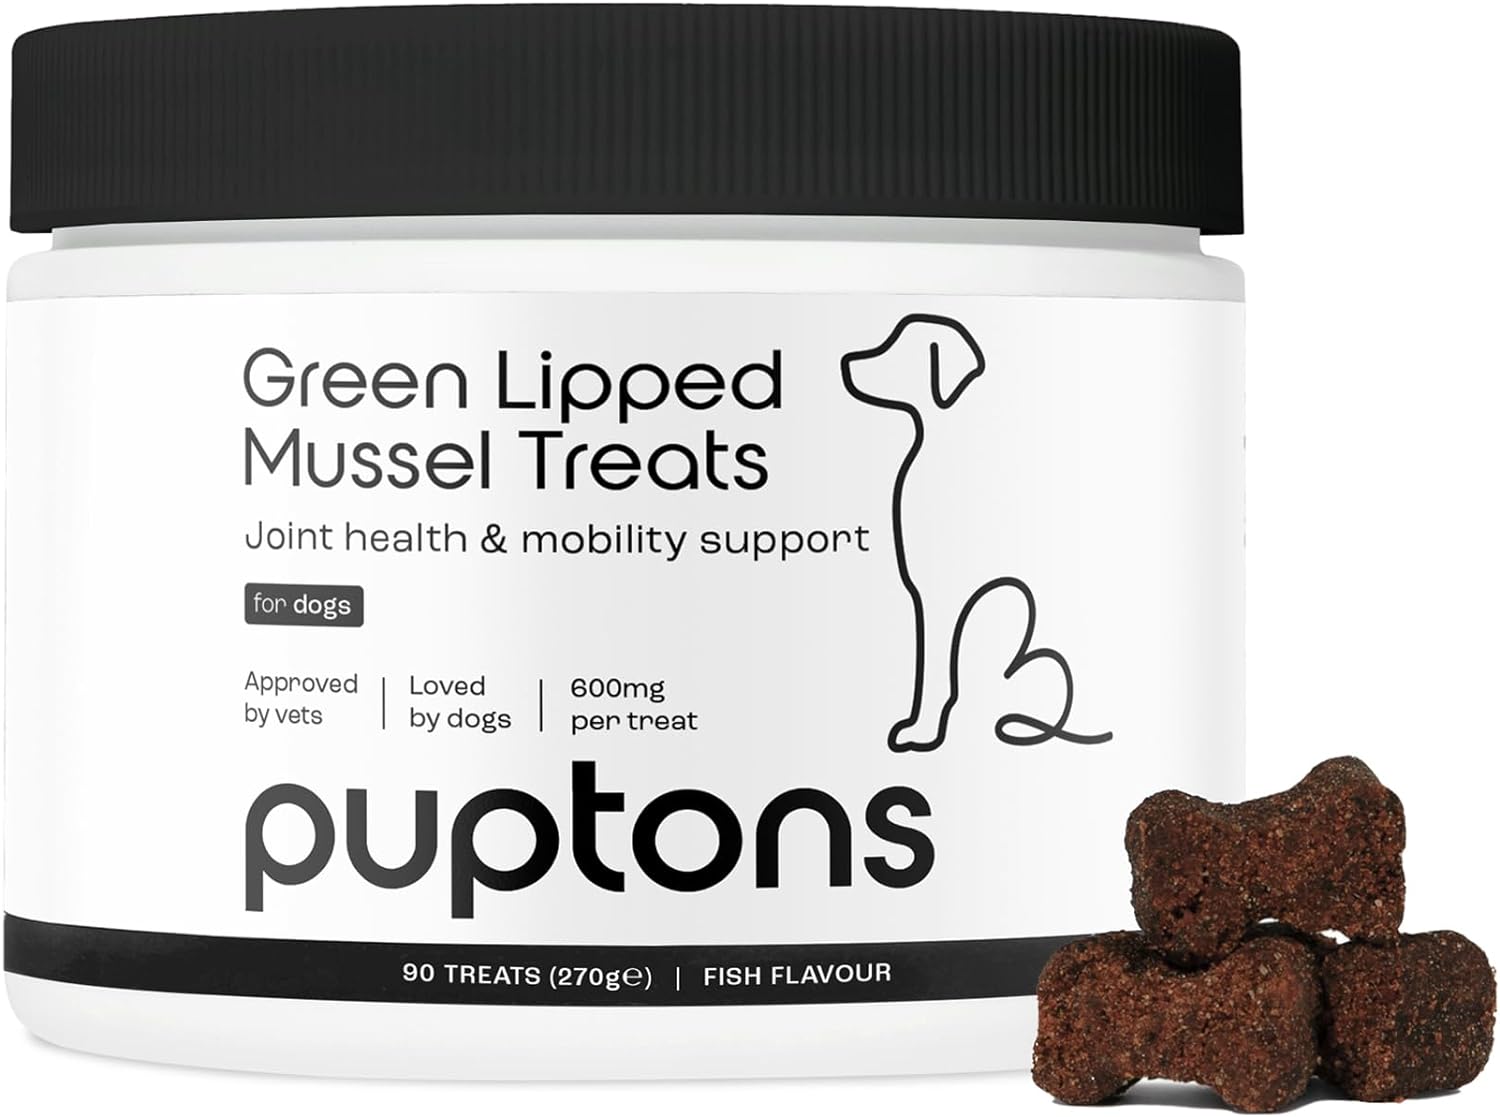 Puptons Green Lipped Mussel Treats for Dogs | Aids Stiff & Aching Joints | 600mg Non-defatted Green Lipped Mussel (90 Treats)?GLMU-DOGS-TREA-UNFL